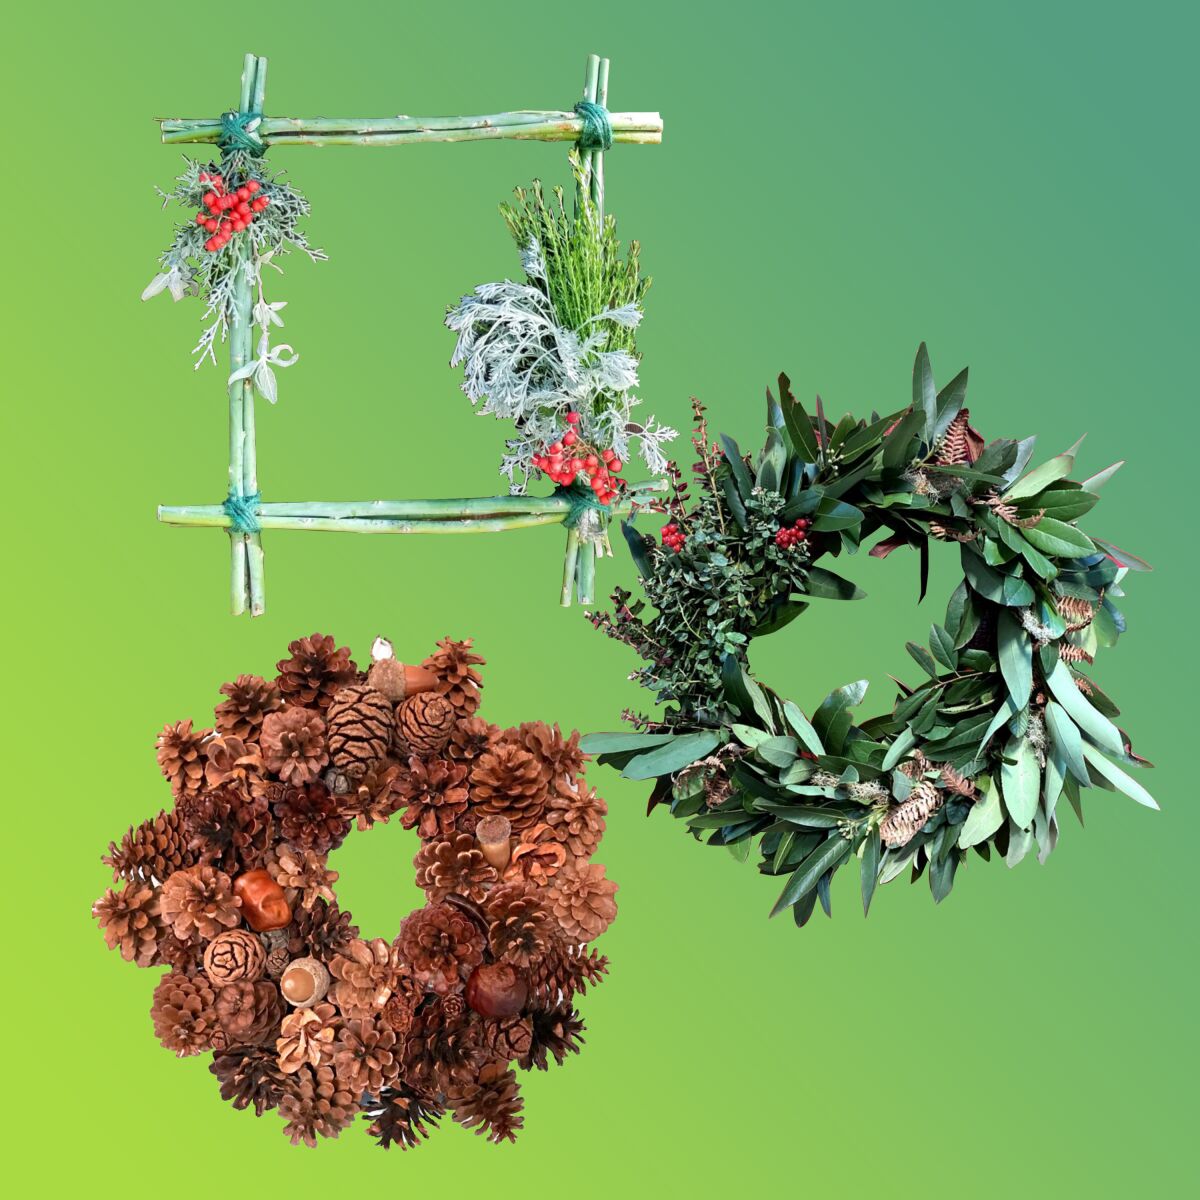 An illustration shows three wreaths, each made of natural materials including sticks, cones and leaves.